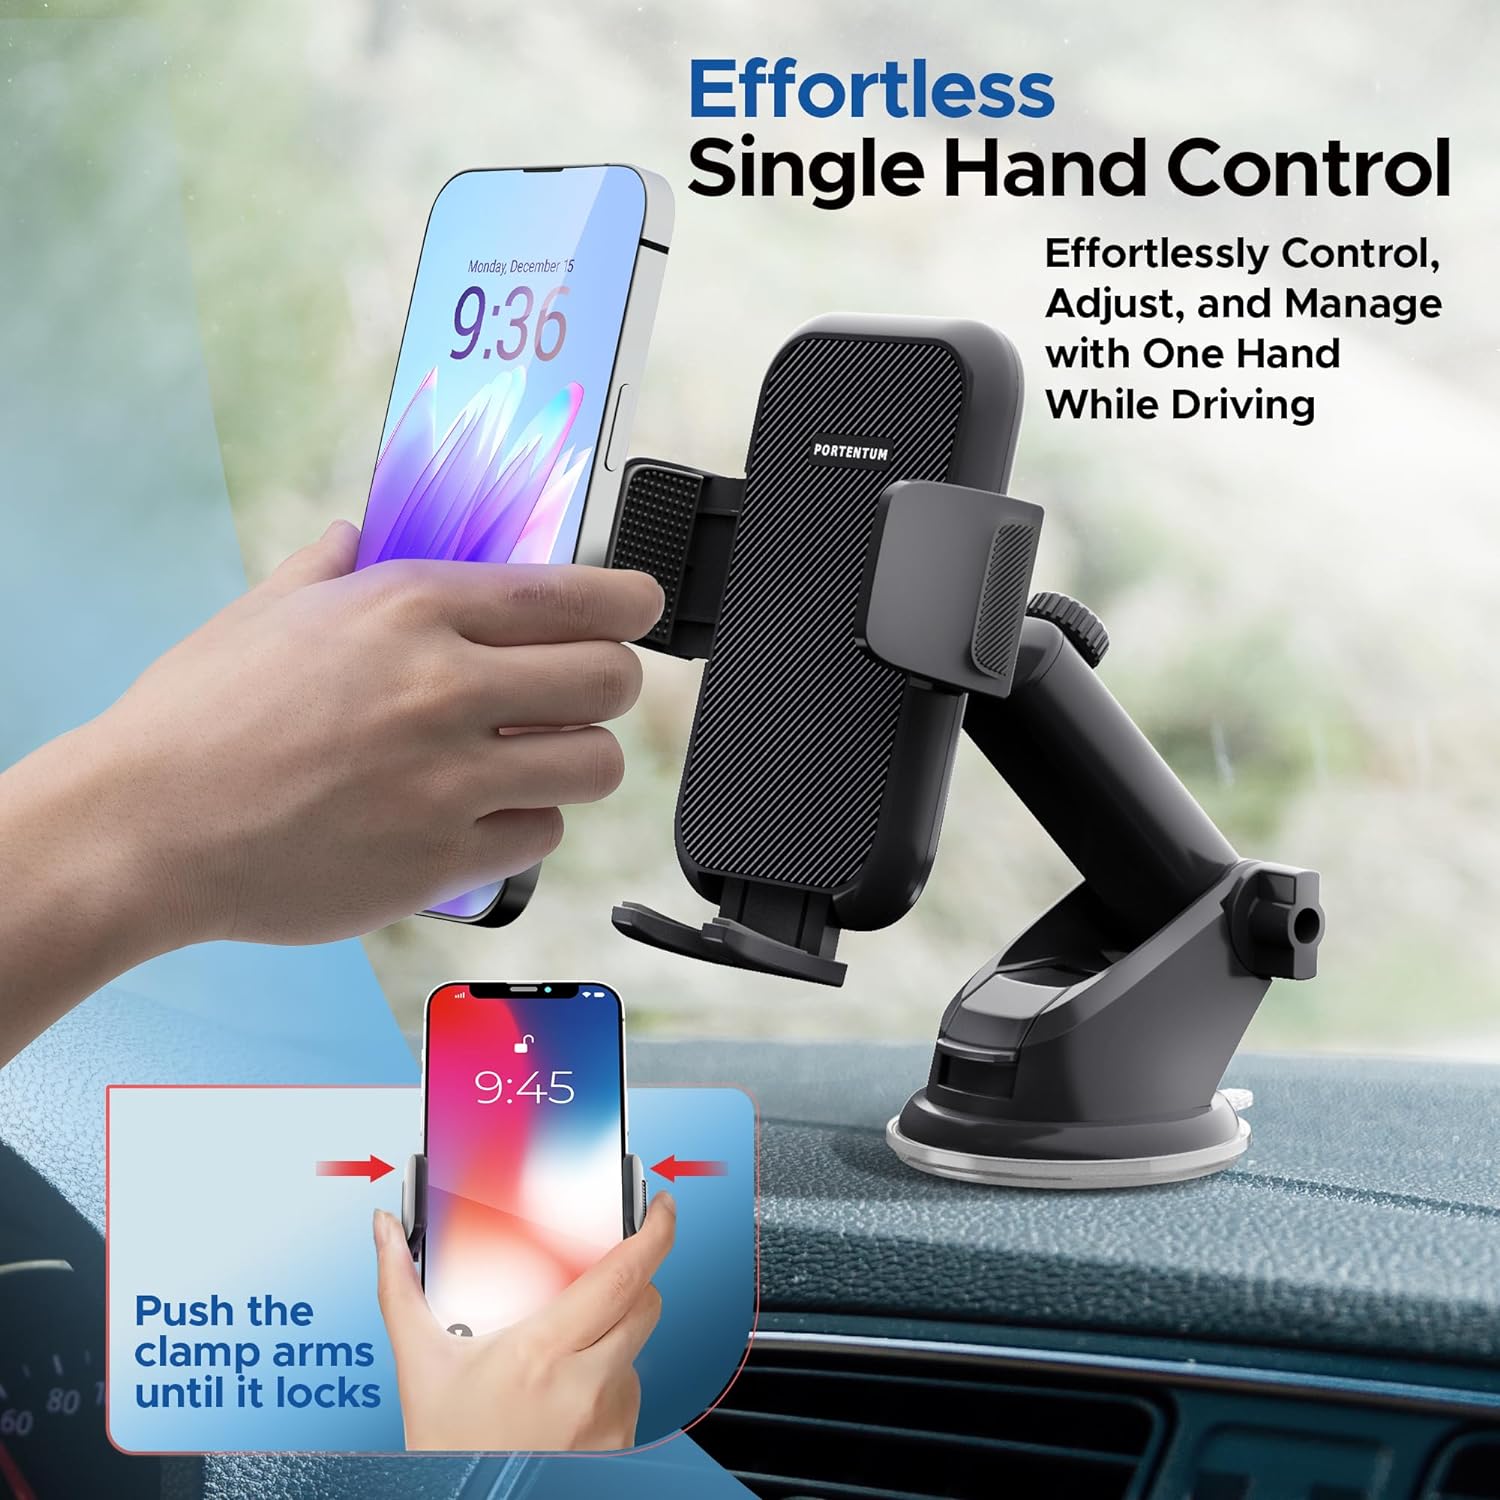 PORTENTUM Car Phone Holder, Adjustable phone holder for cars 360° Rotation for Car Dashboard/Windscreen - Upgraded Strong Suction - One Button Release Car Phone Cradle for 4.0'' - 7.0'' Phones - Amazing Gadgets Outlet